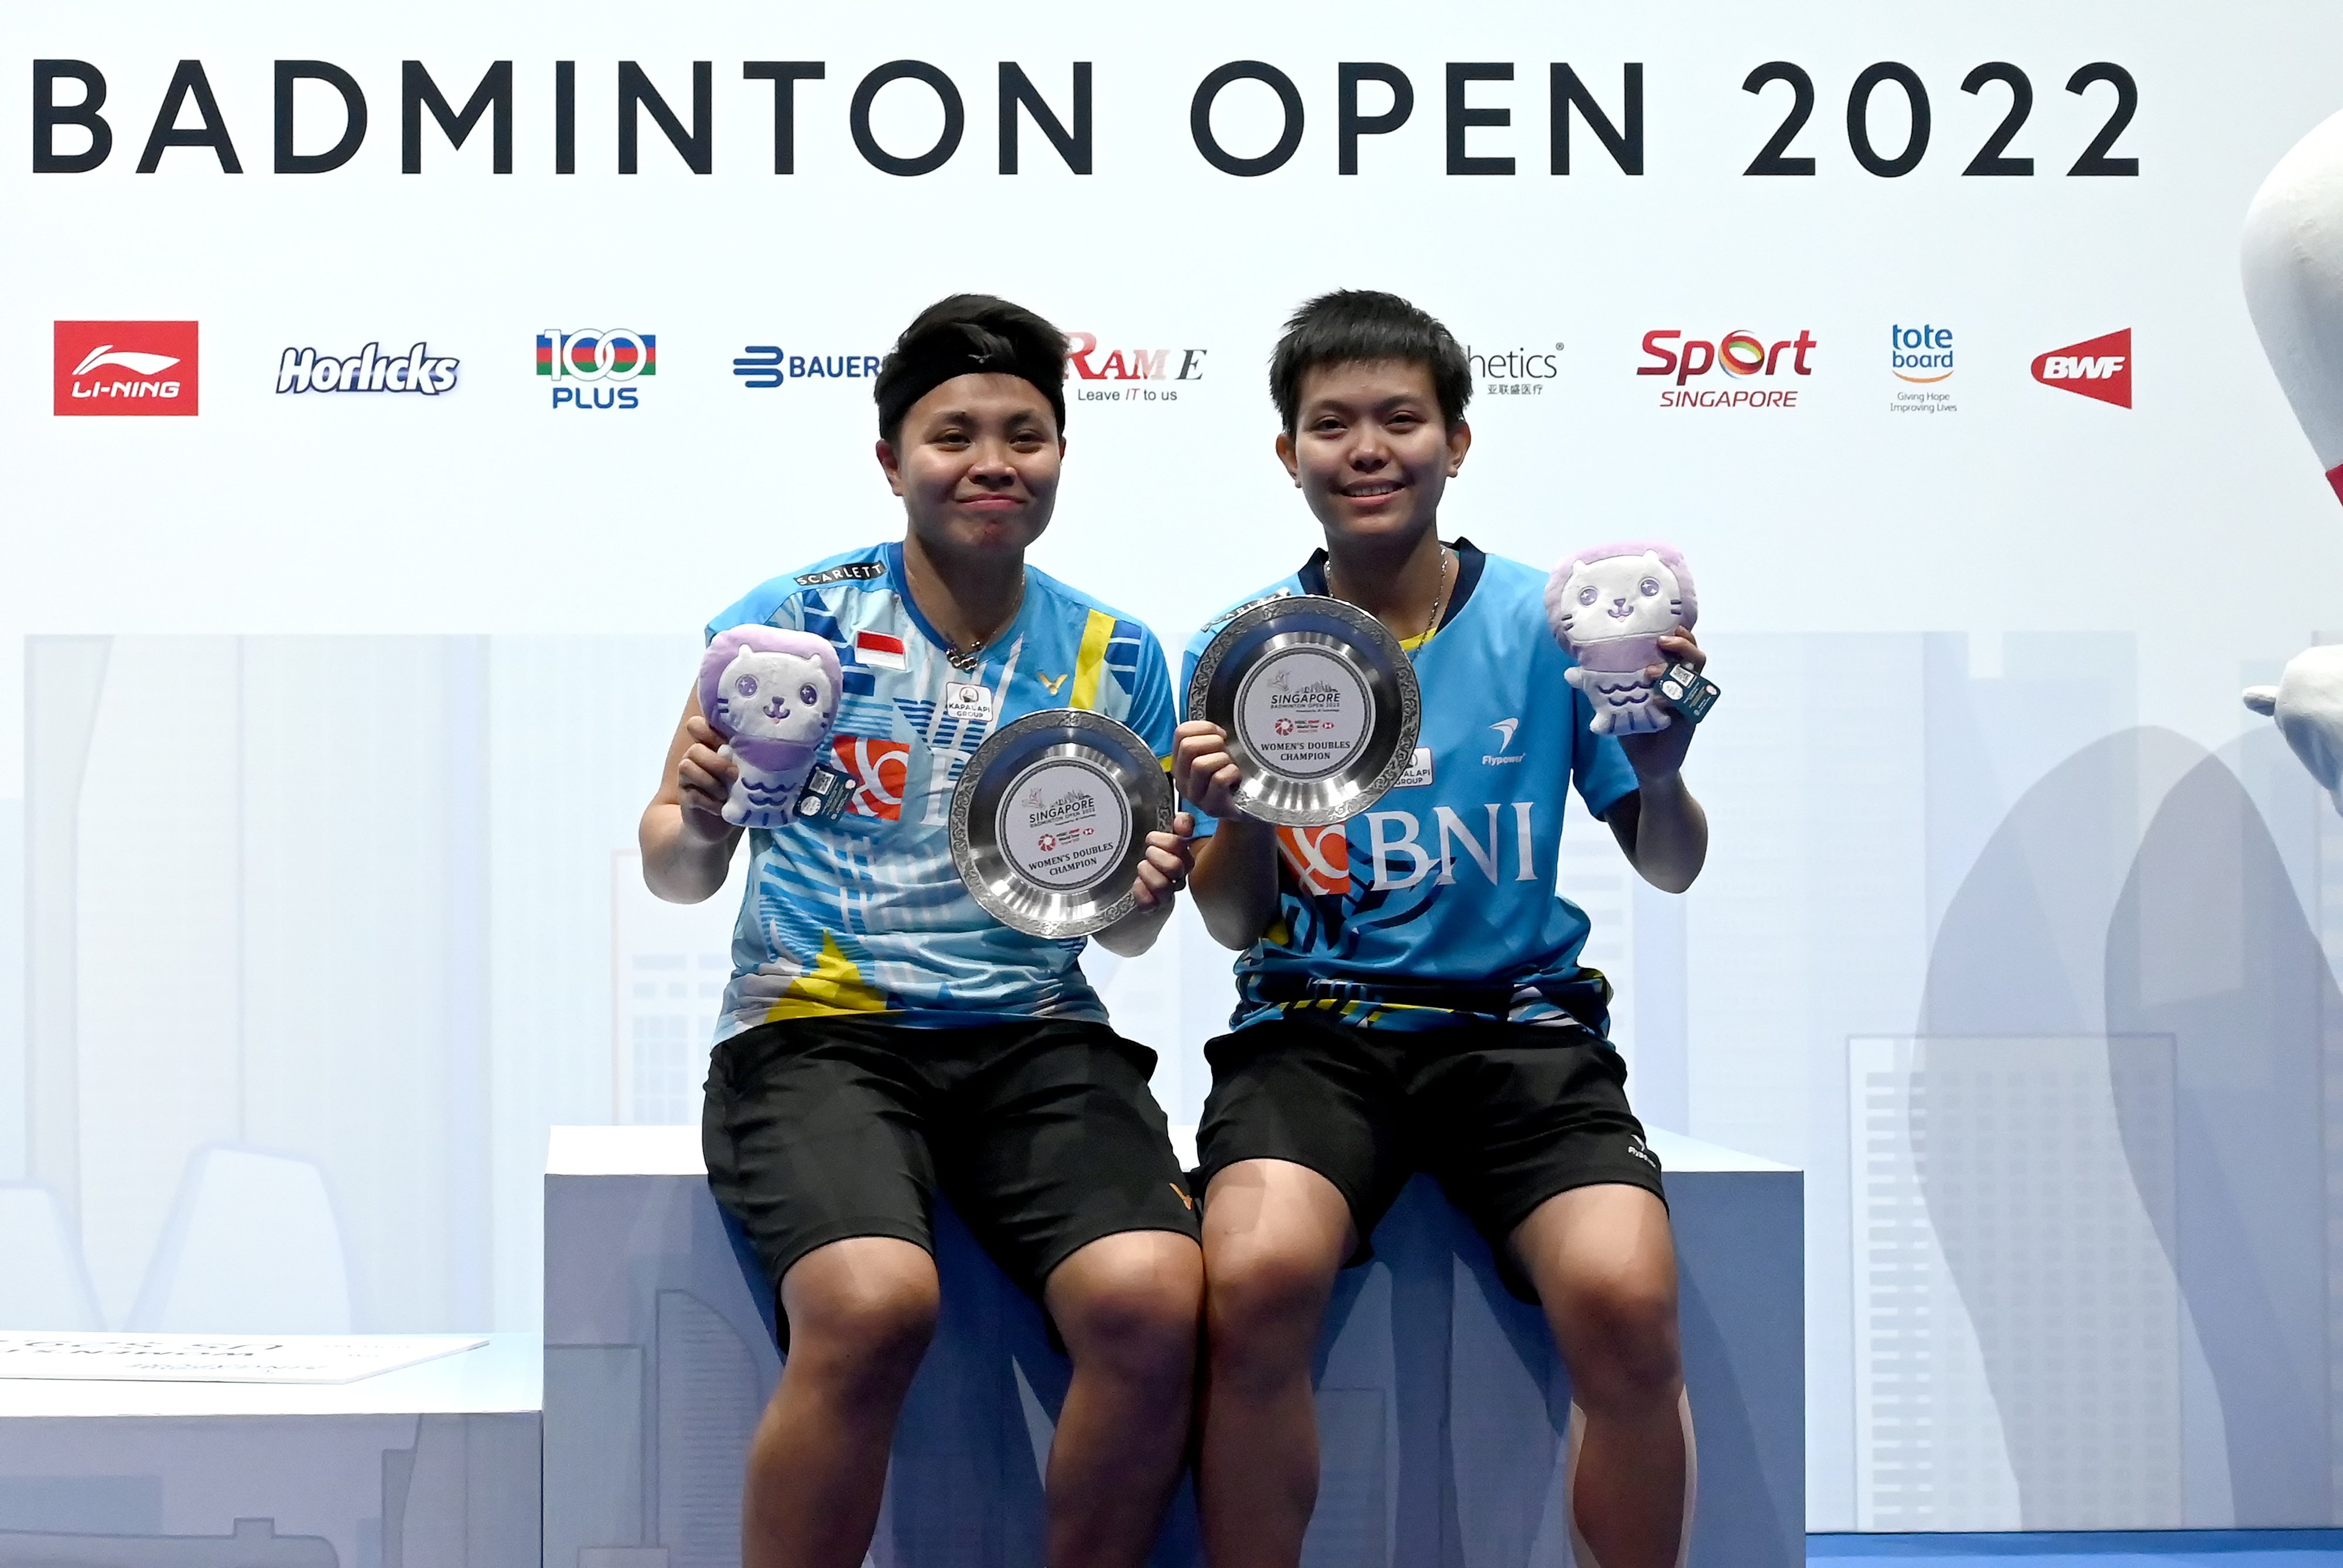 Defending Champions Returning to Compete at Singapore Badminton Open 2023!